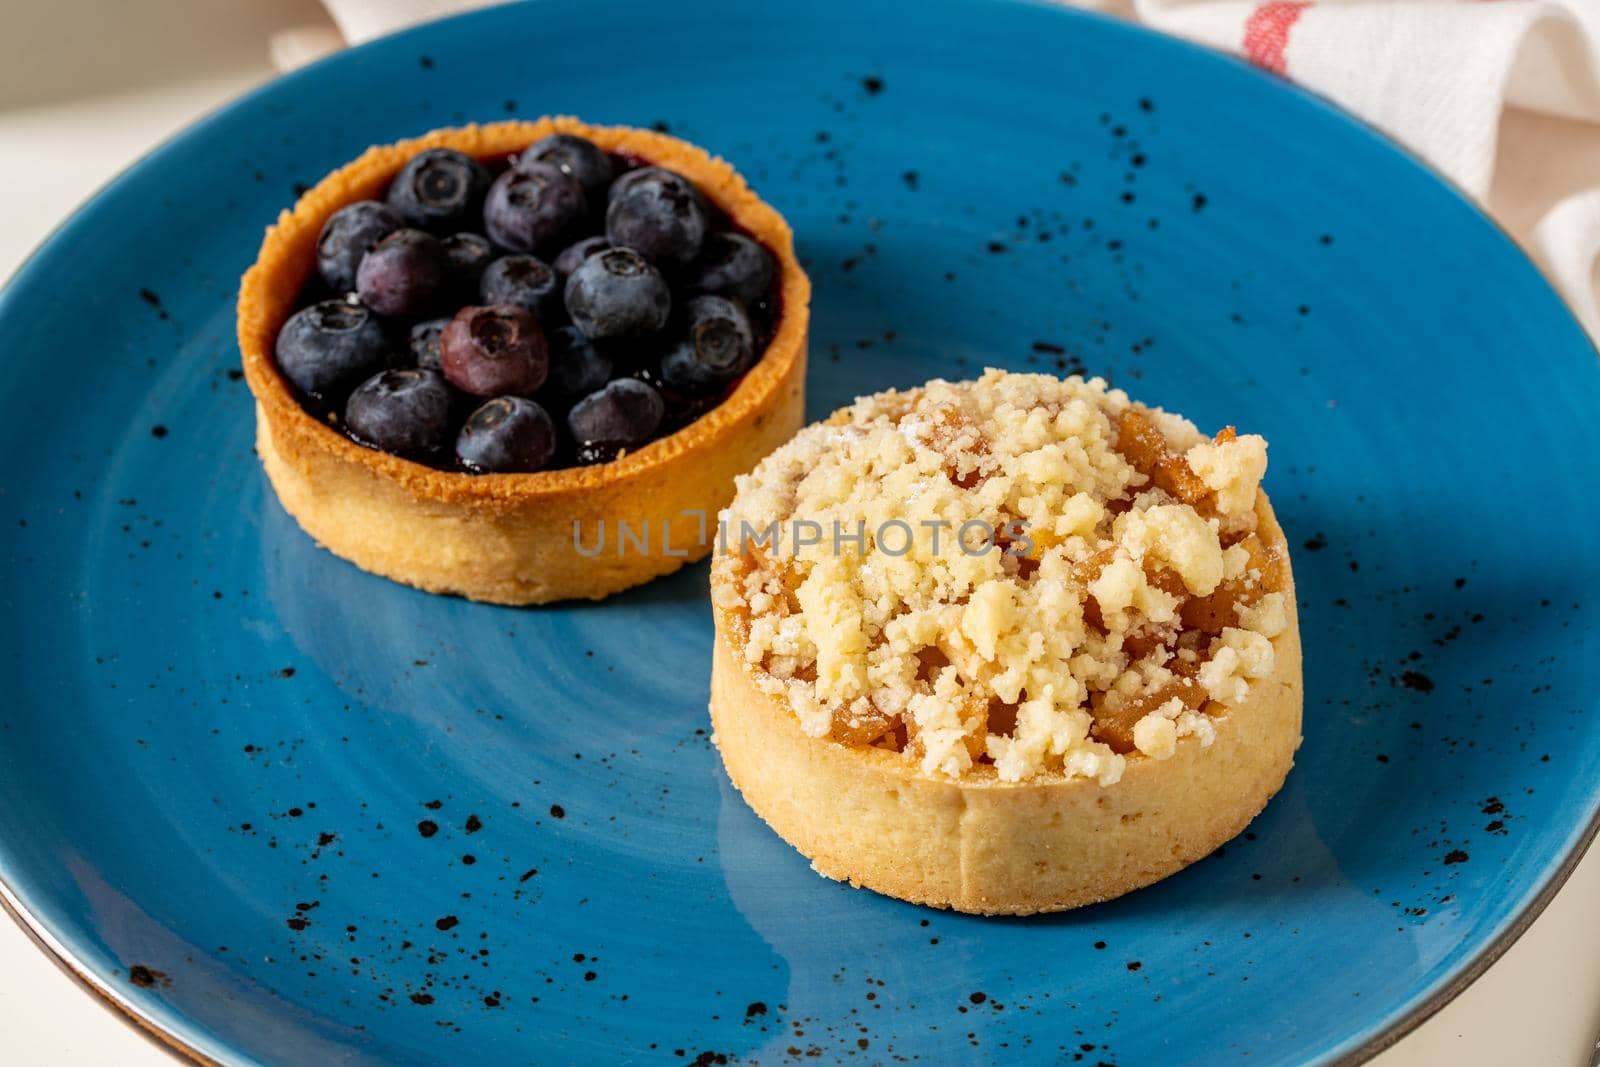 Freshly baked single portion blueberry and apple pie on a blue porcelain plate by Sonat